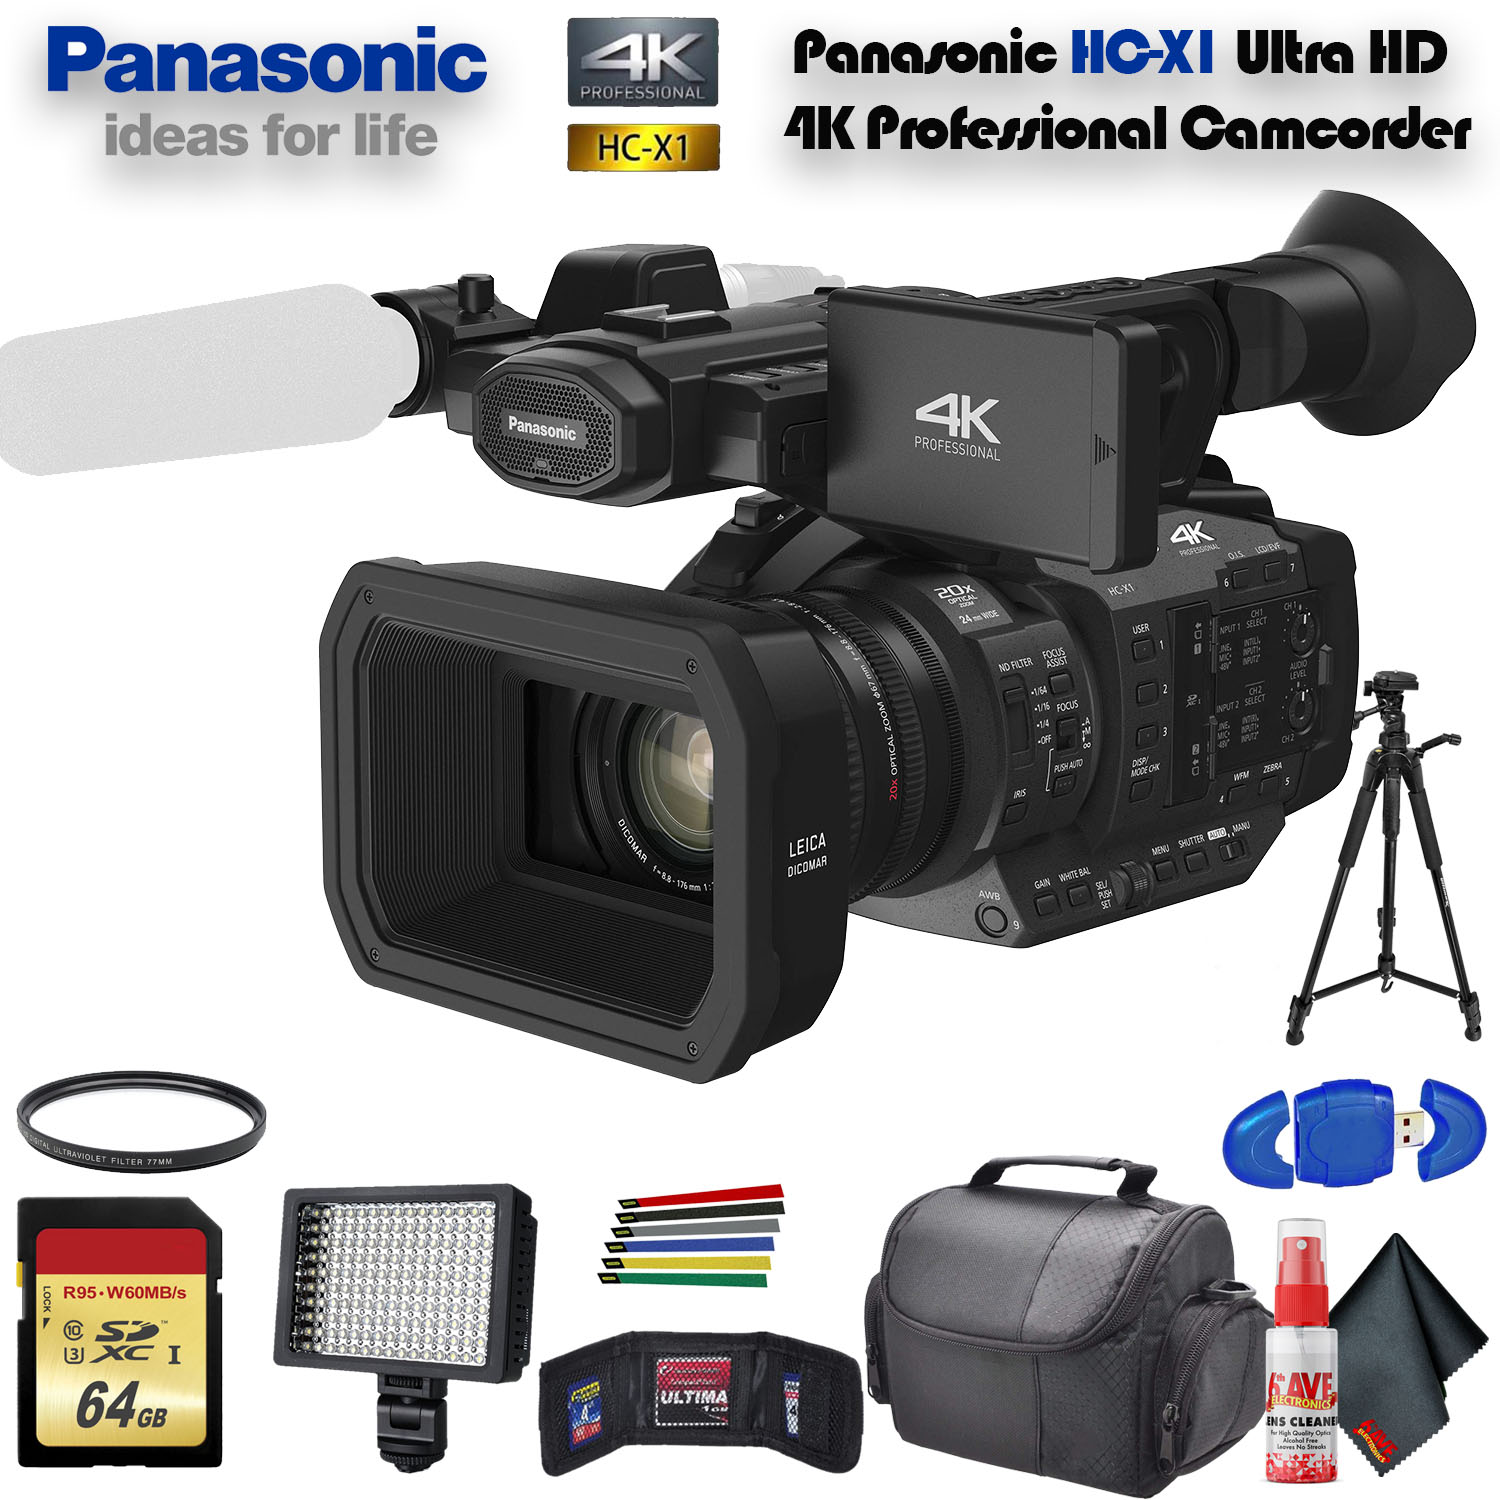 Panasonic HC-X1 Ultra HD 4K Professional Camcorder (HC-X1) With UV Filter, Tripod, Padded Case, LED Light, 64GB Memory Card and More Starter Bundle - image 1 of 5